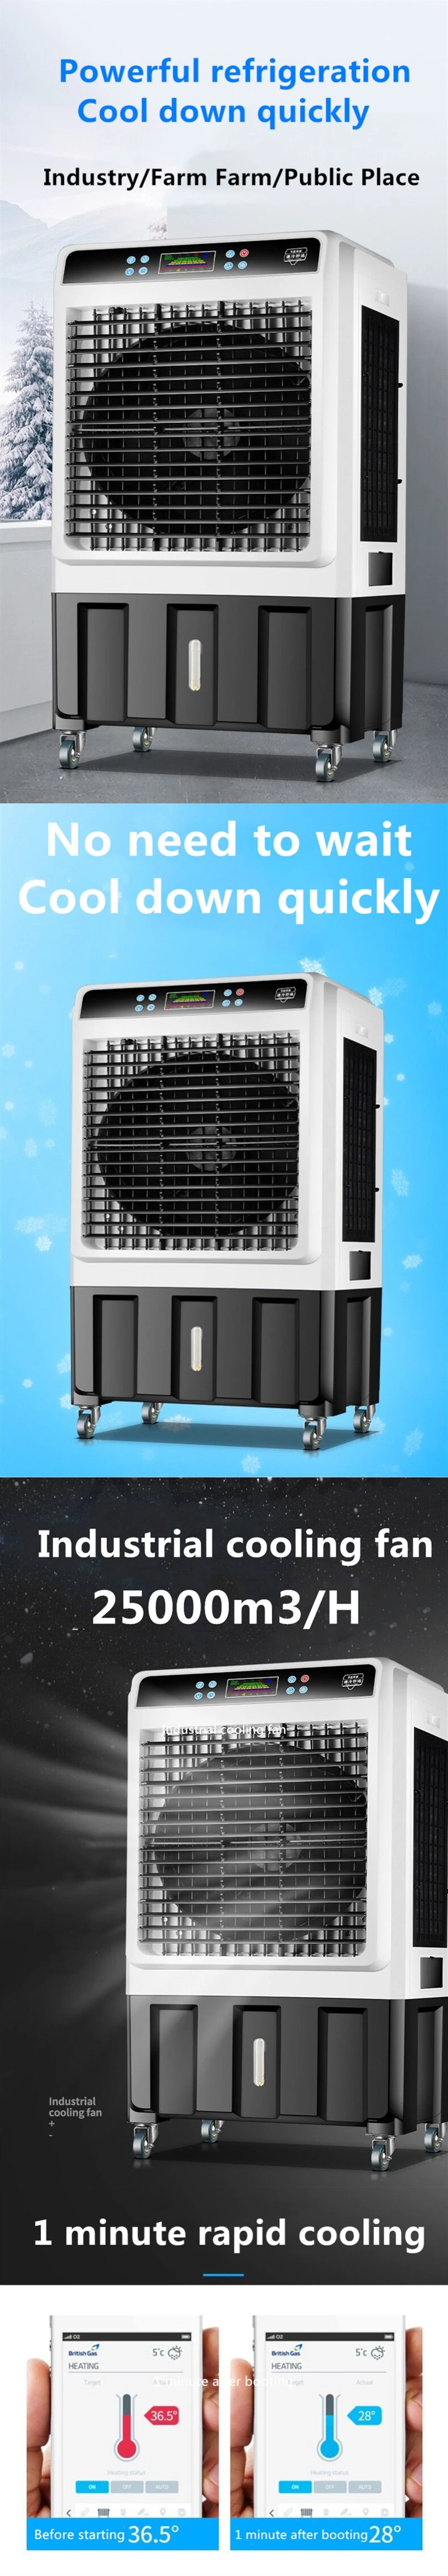 Portable Evaporative Coolers Rooftop Evaporative Air Cooler Climatizador Evaporativo Evaporative Air Cooler